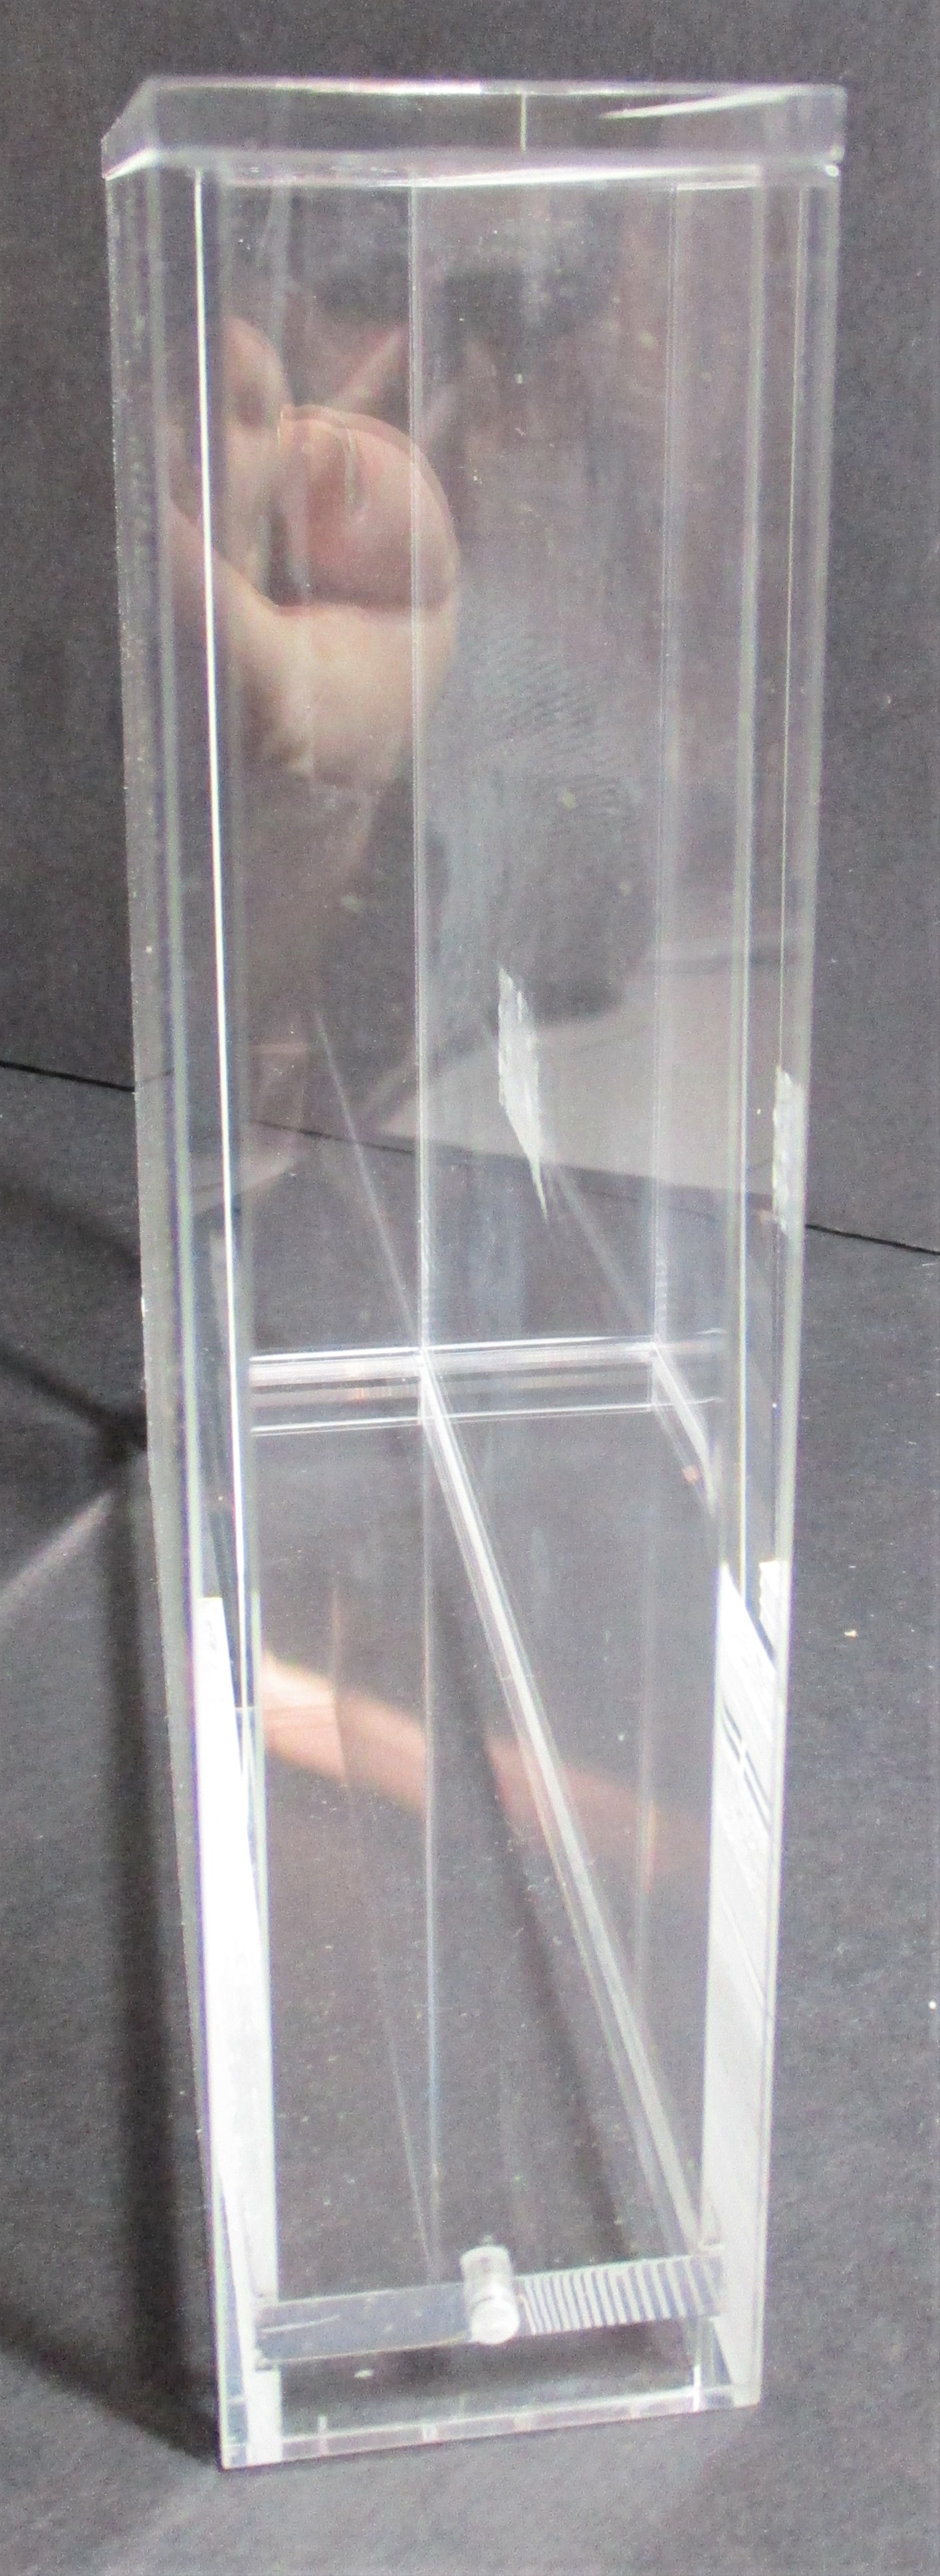 5x PS1 Acrylic Display Guard with Insert (60035)